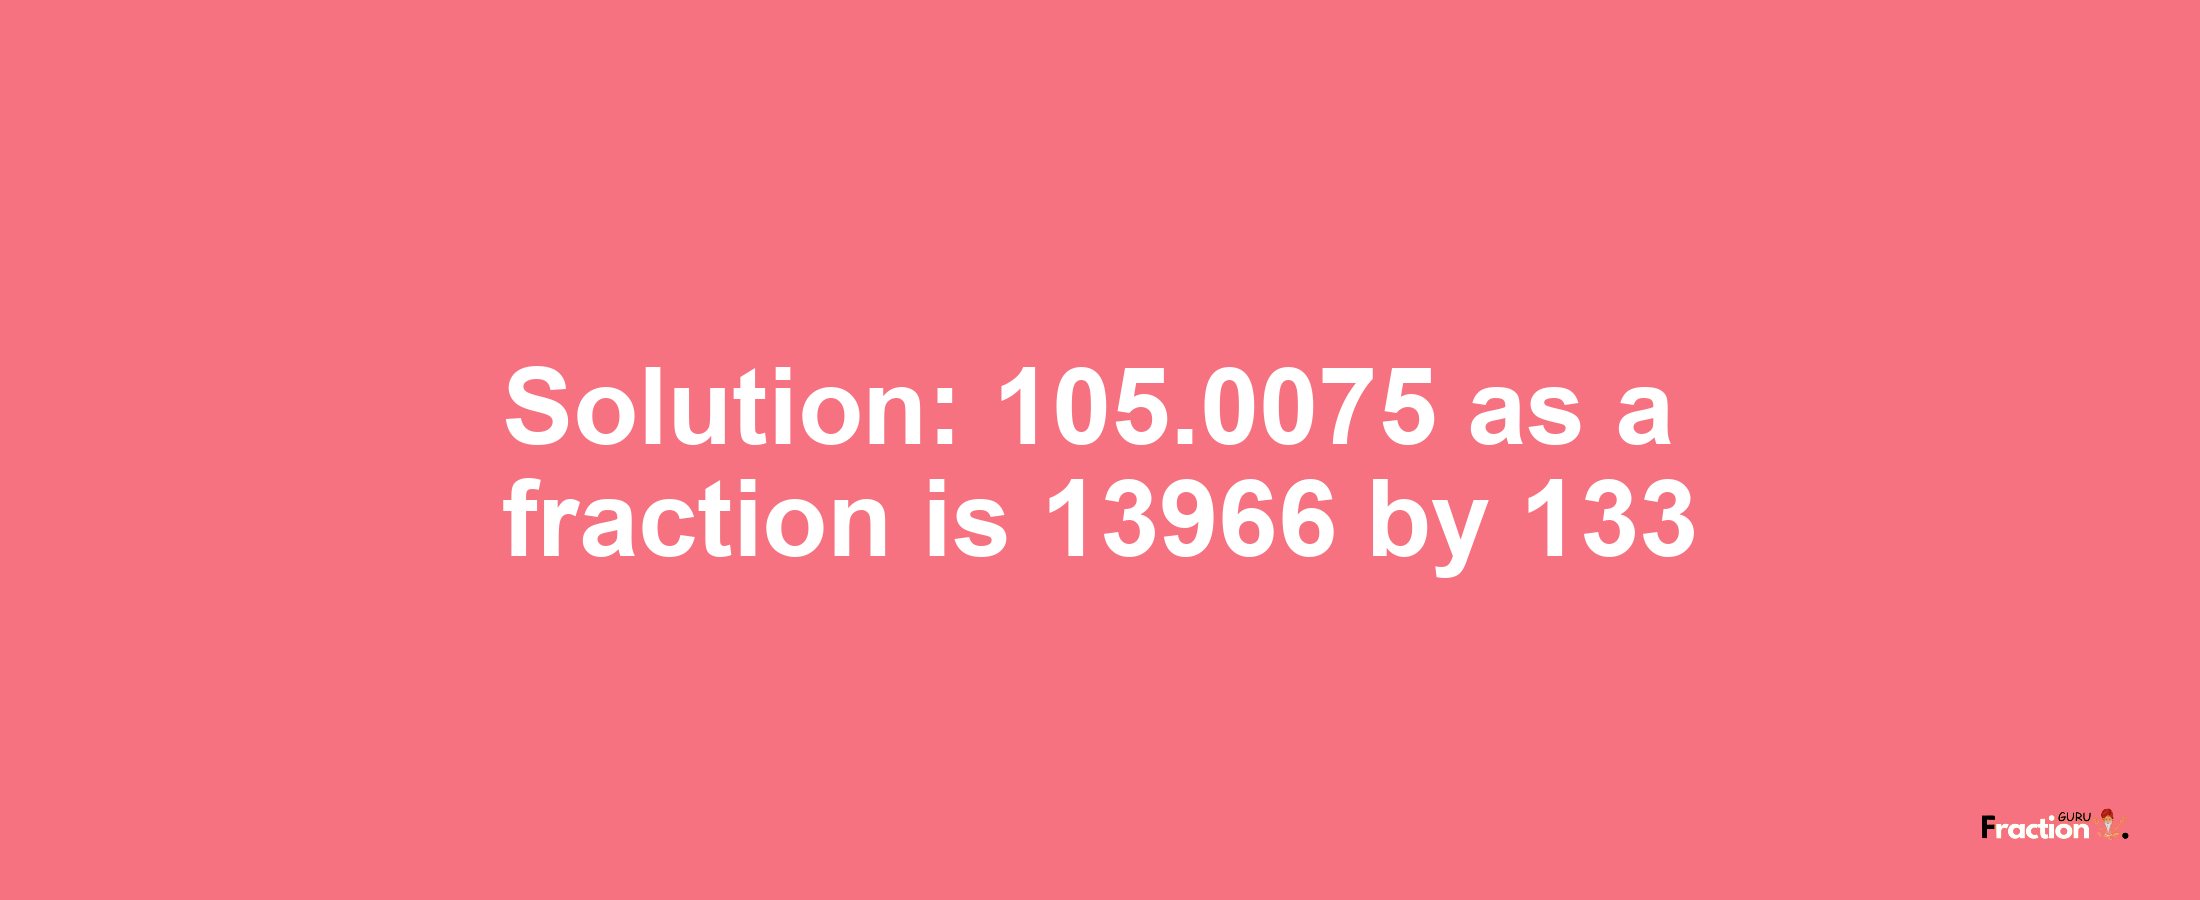 Solution:105.0075 as a fraction is 13966/133